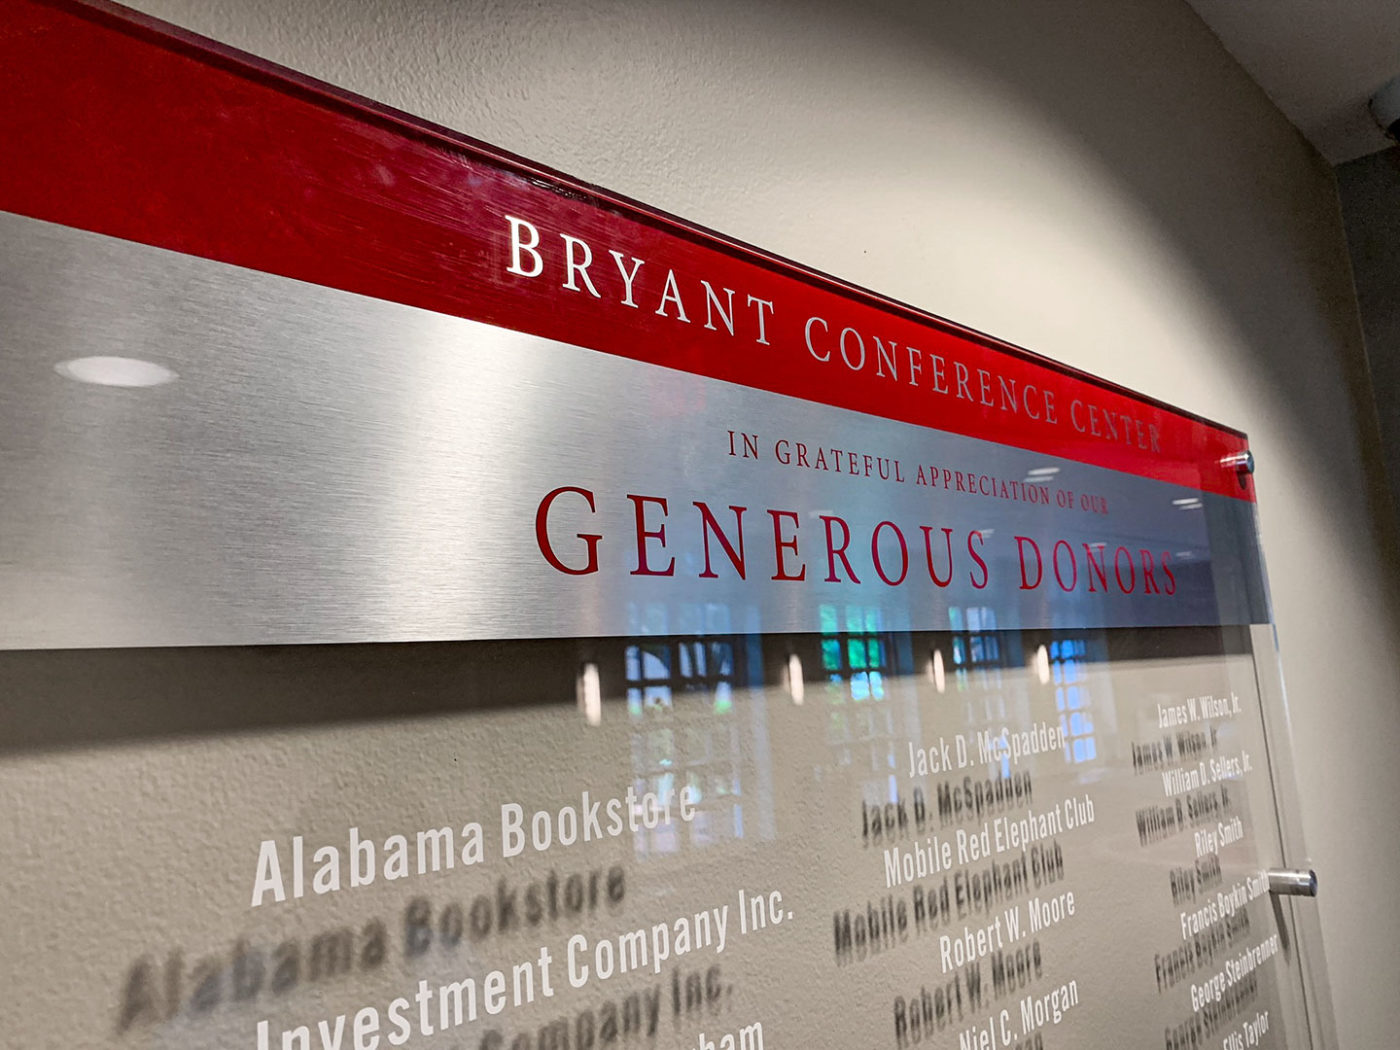 Acrylic donor display signage for Bryant Conference Center